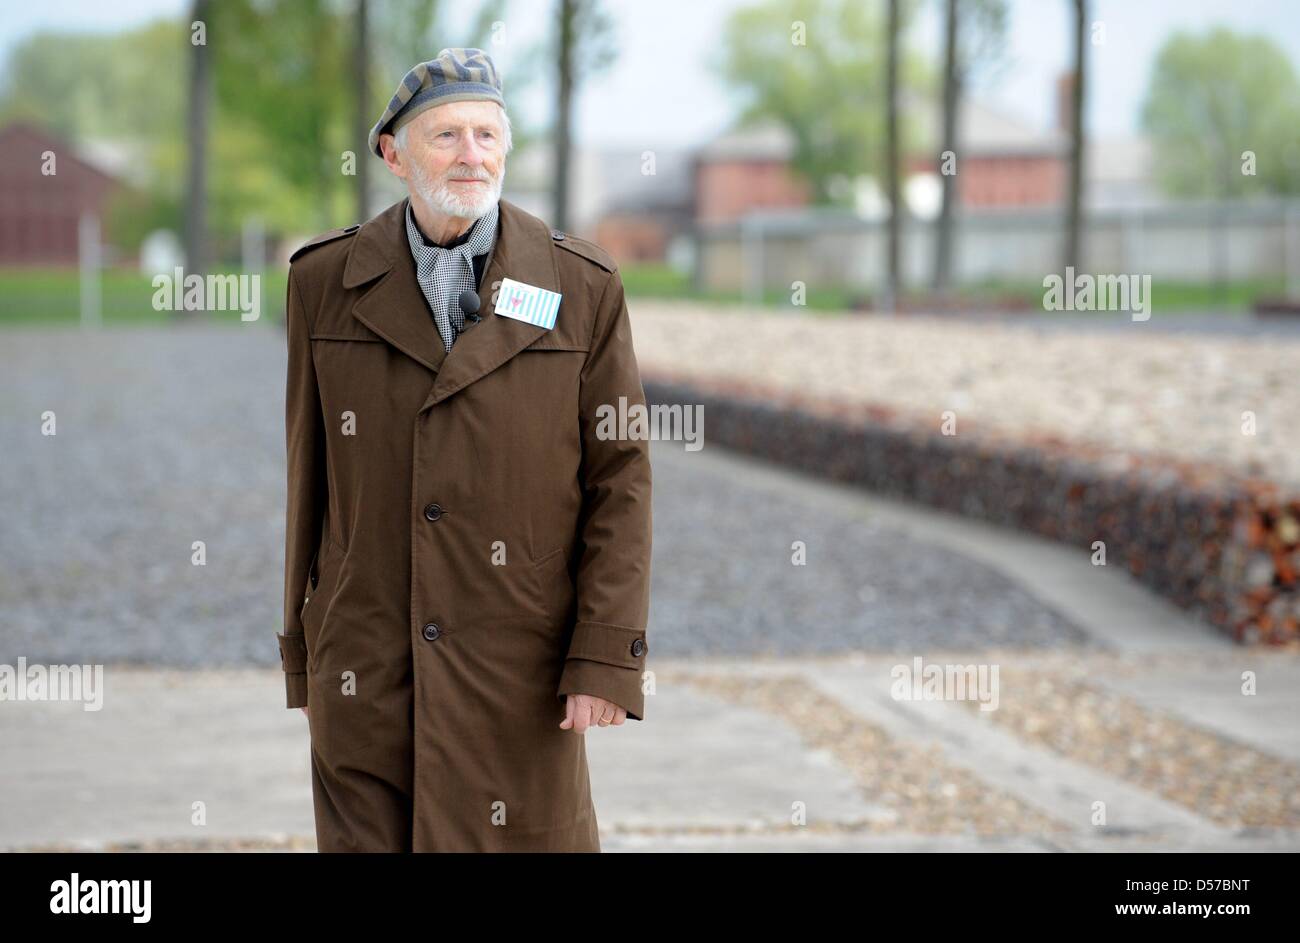 Survivor Kahl Januz walks over the grounds of the former concentration camp Neuengamme in Hamburg, Germany, 04 May 2010. Survivors recollected their experiences within the scope of the 65th anniversary of the camp's liberation. Photo: MAURIZIO GAMBARINI Stock Photo